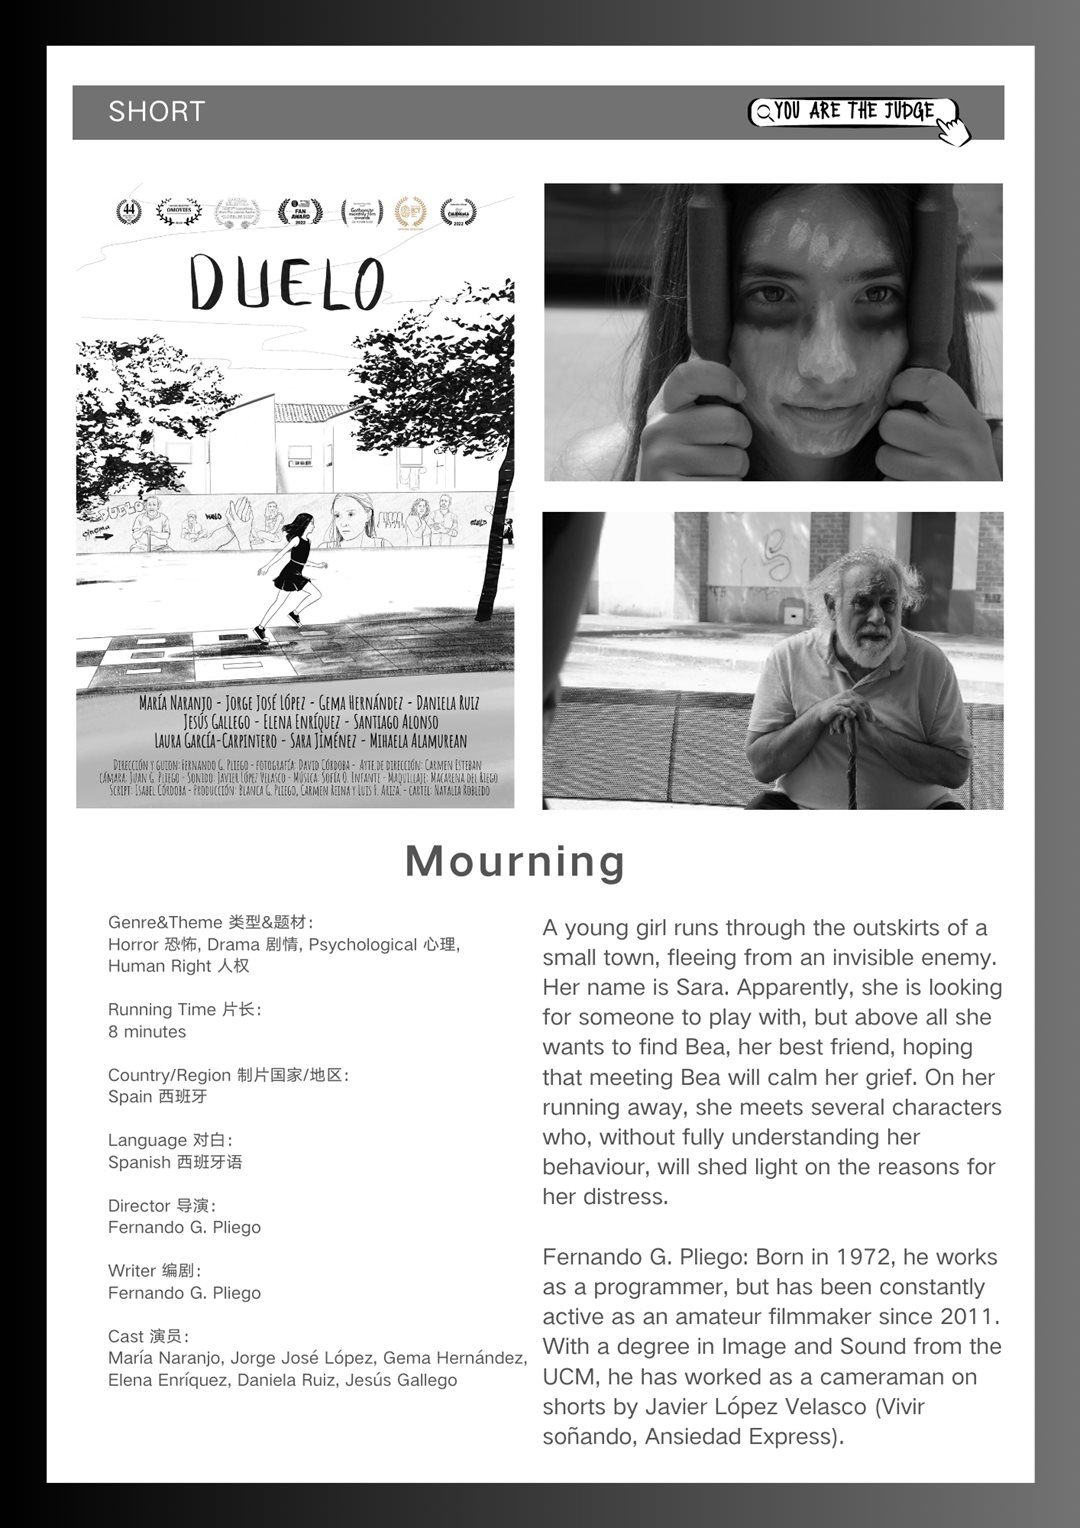 Short短片-Spain西班牙《Mourning--Duelo》.png